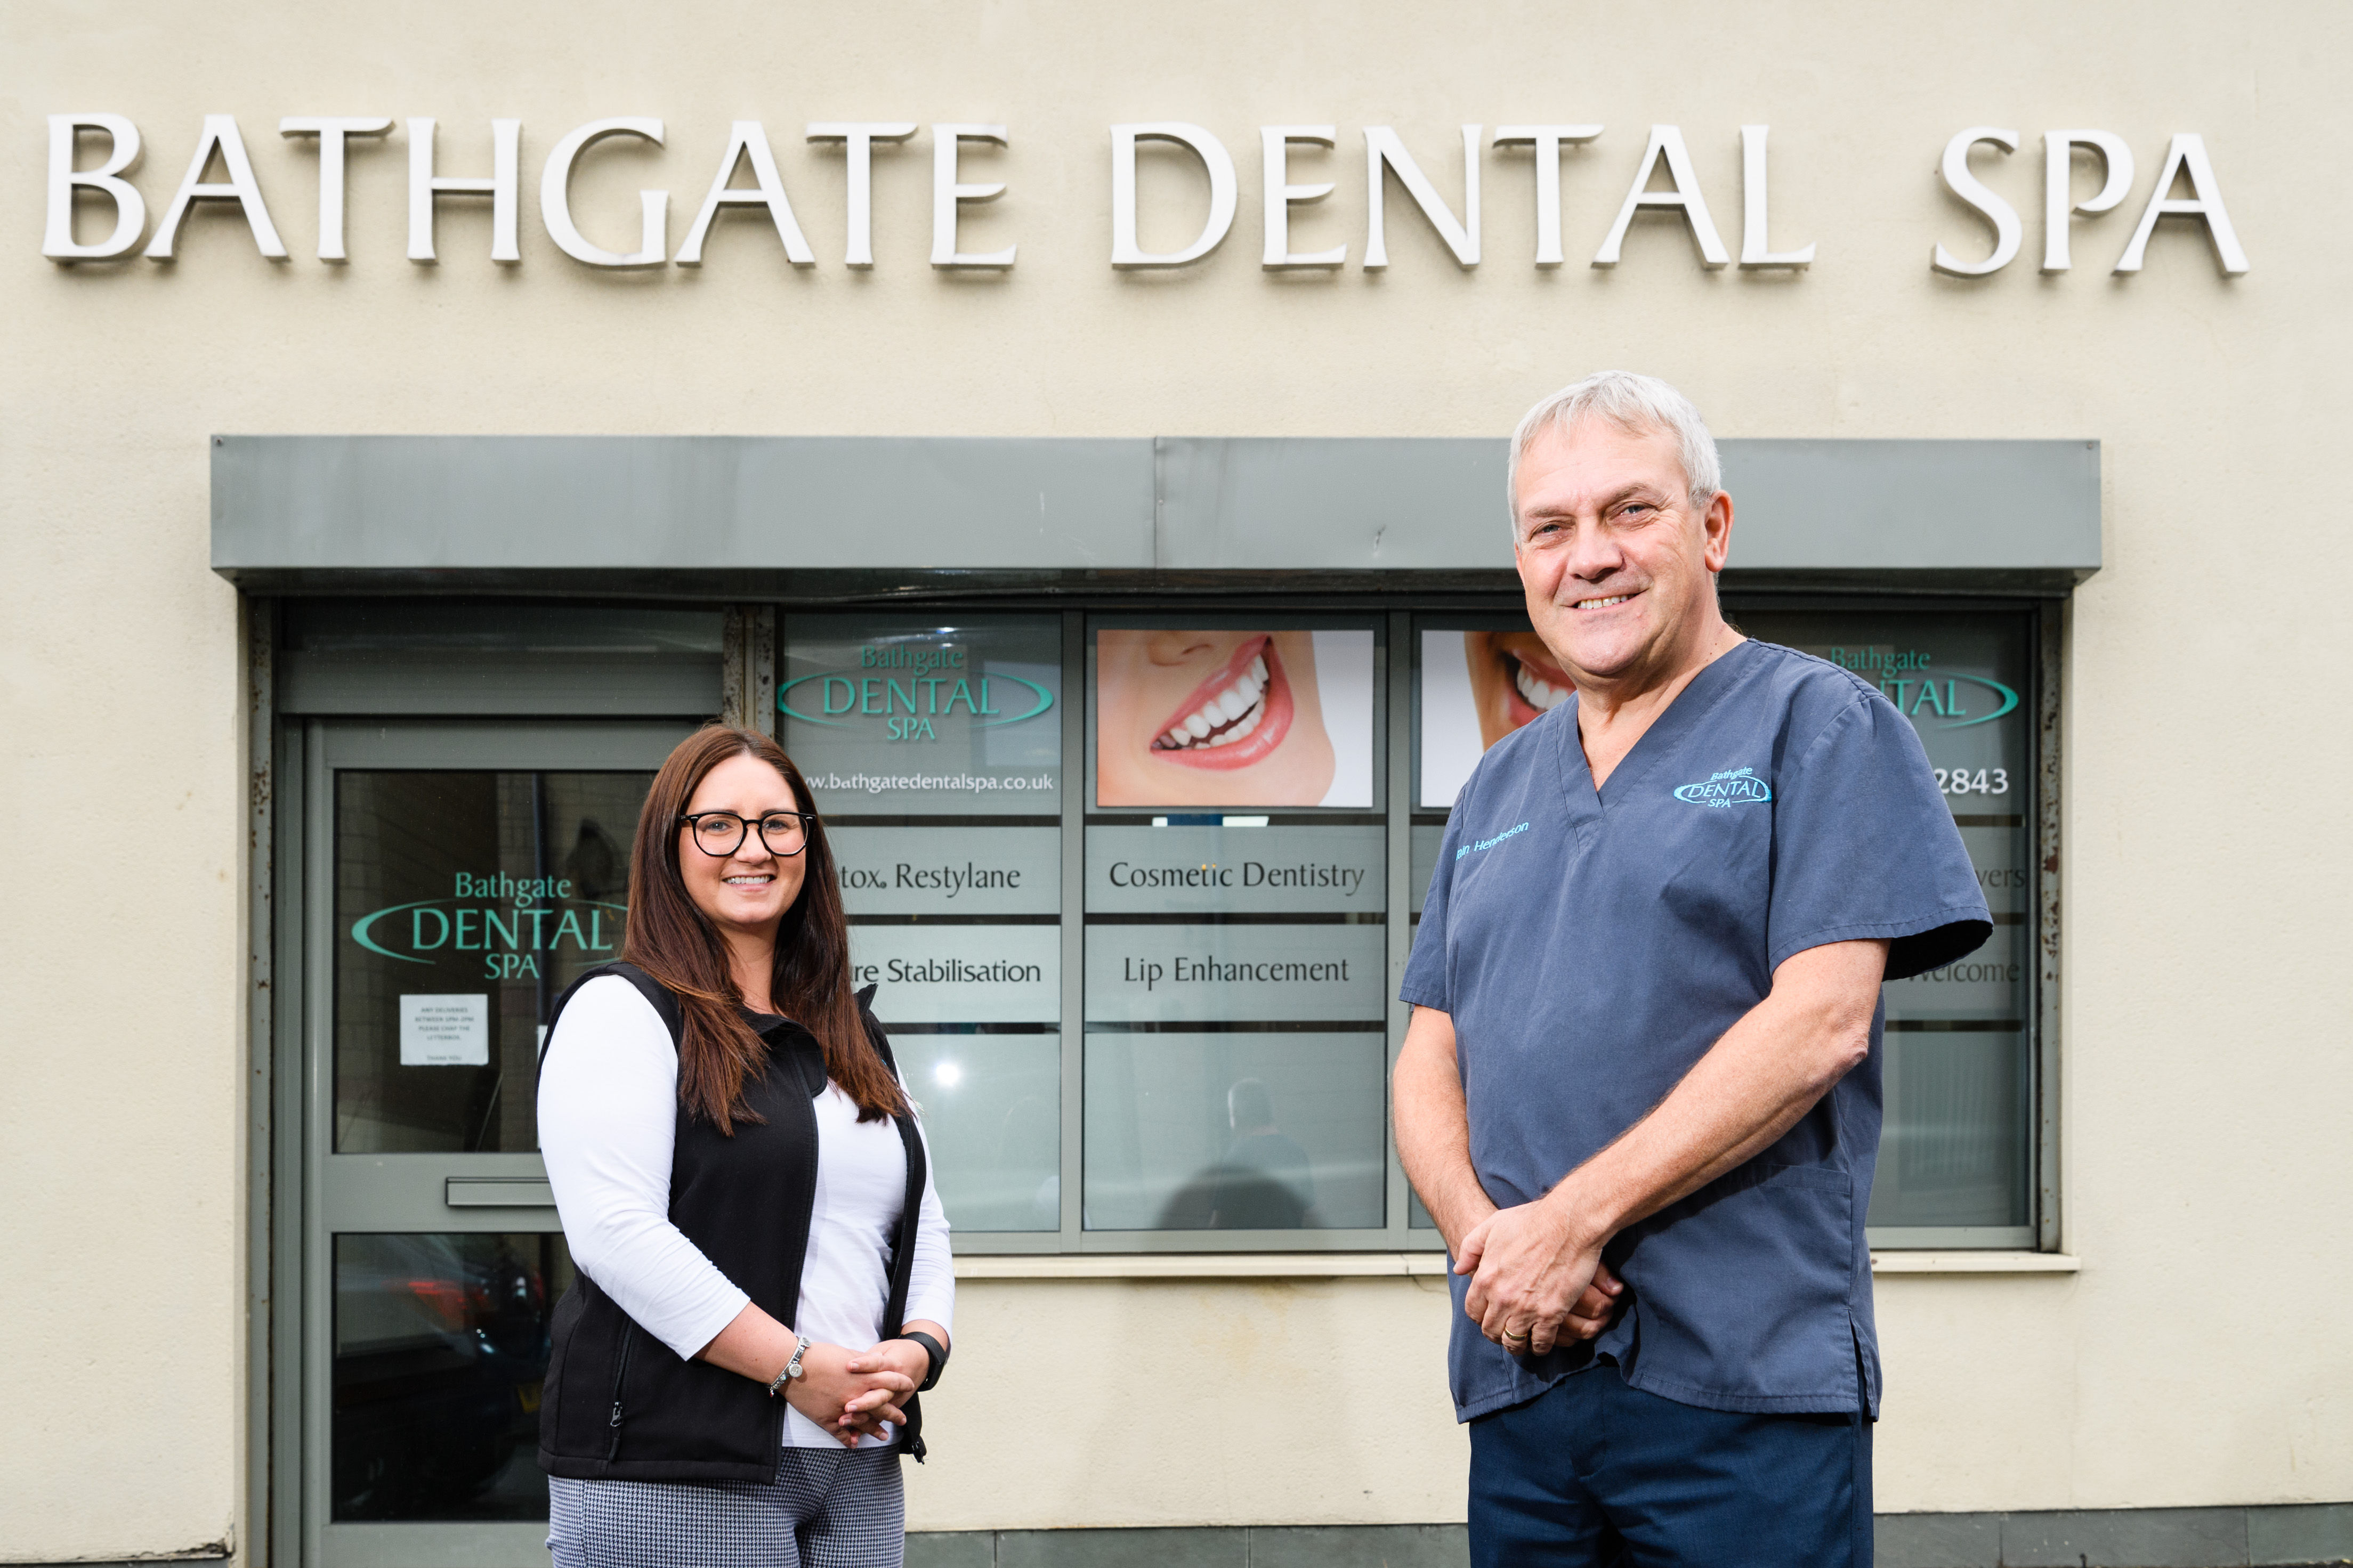 Bathgate Dental Spa acquired by Clyde Munro